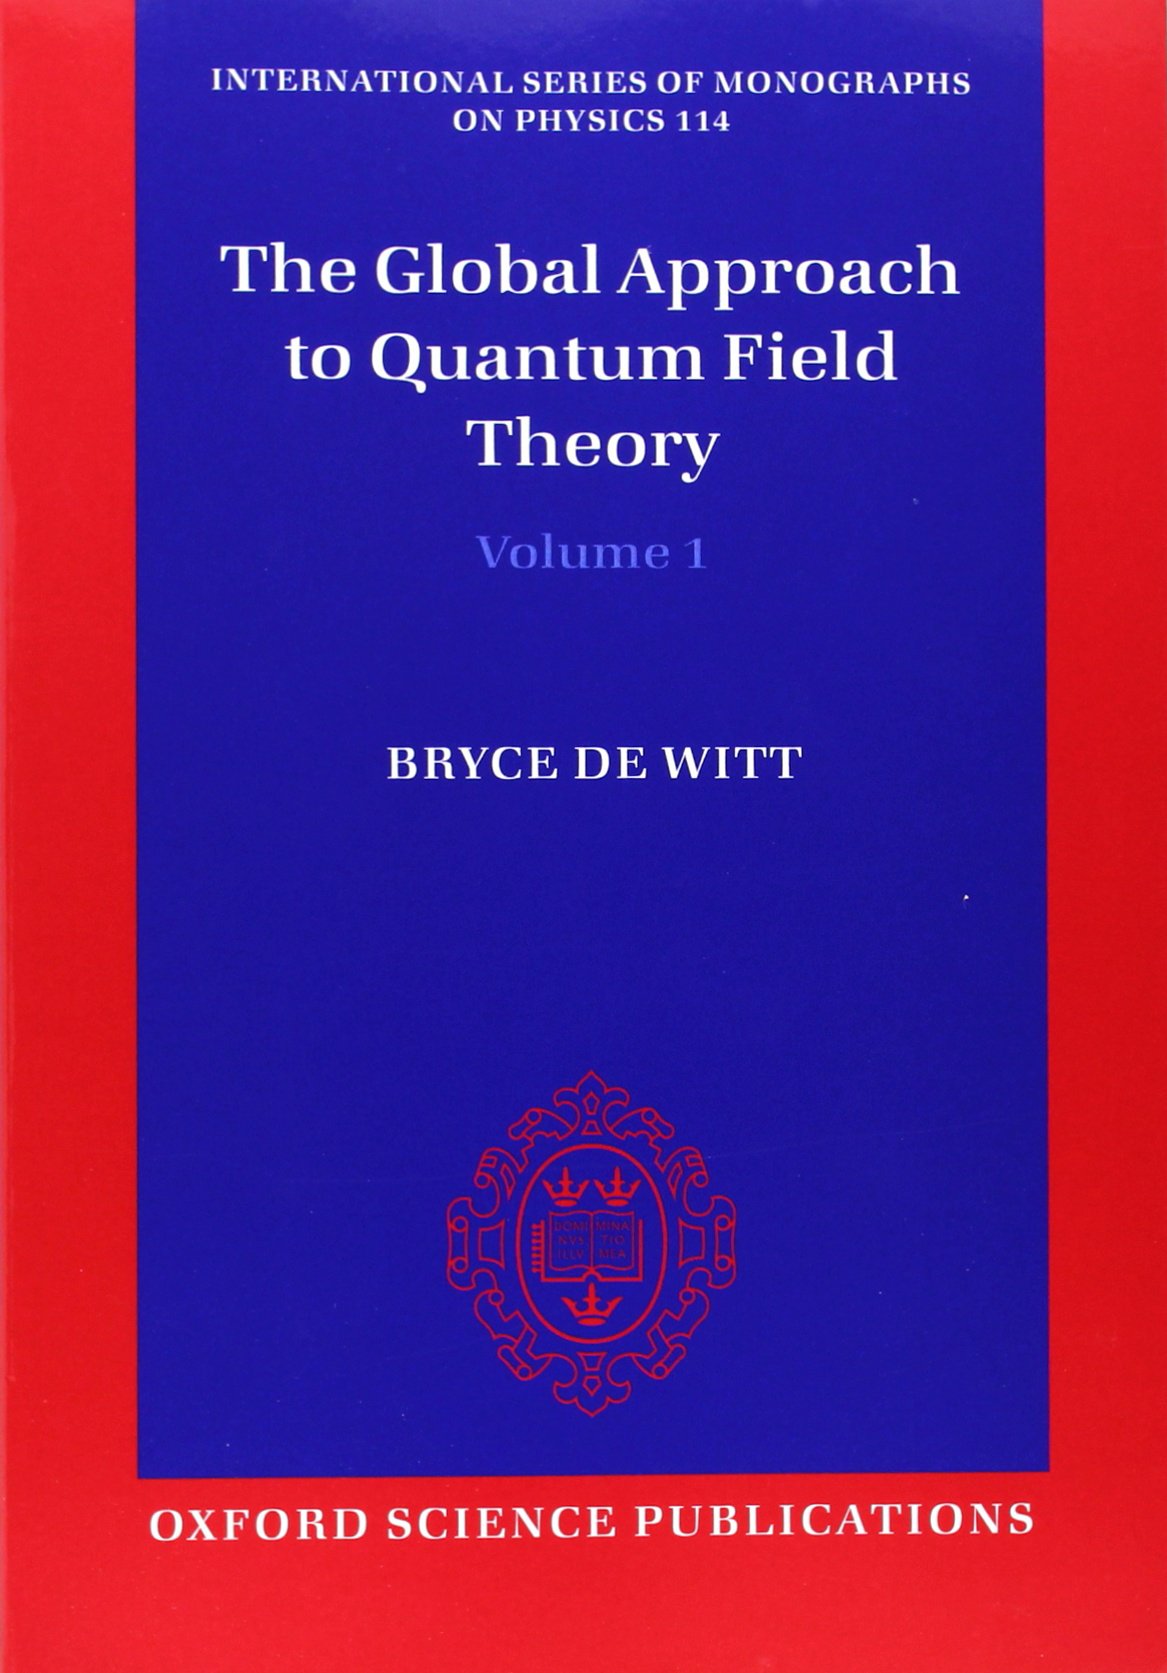 Quantum Field Theory: A Diagrammatic Approach (Hardcover) 